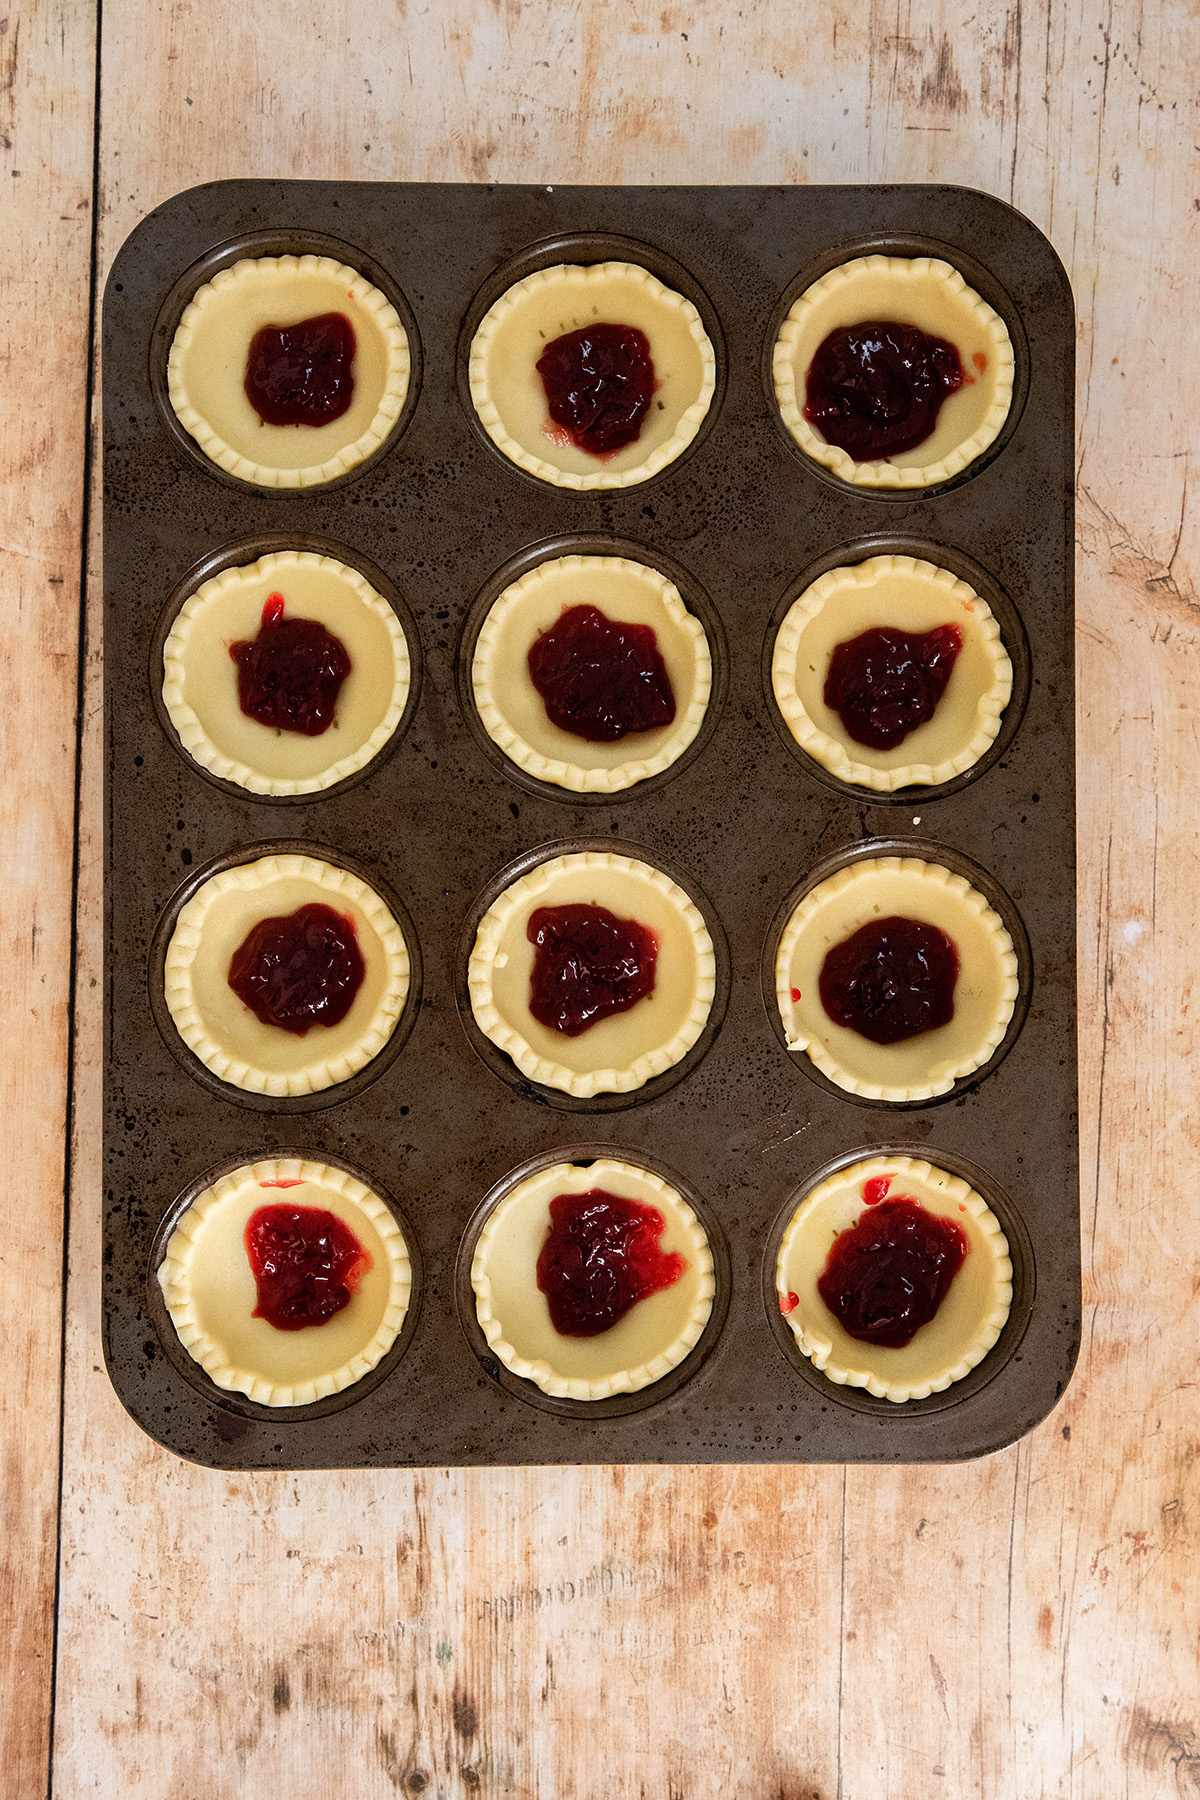 pastry filled with raspberry jam